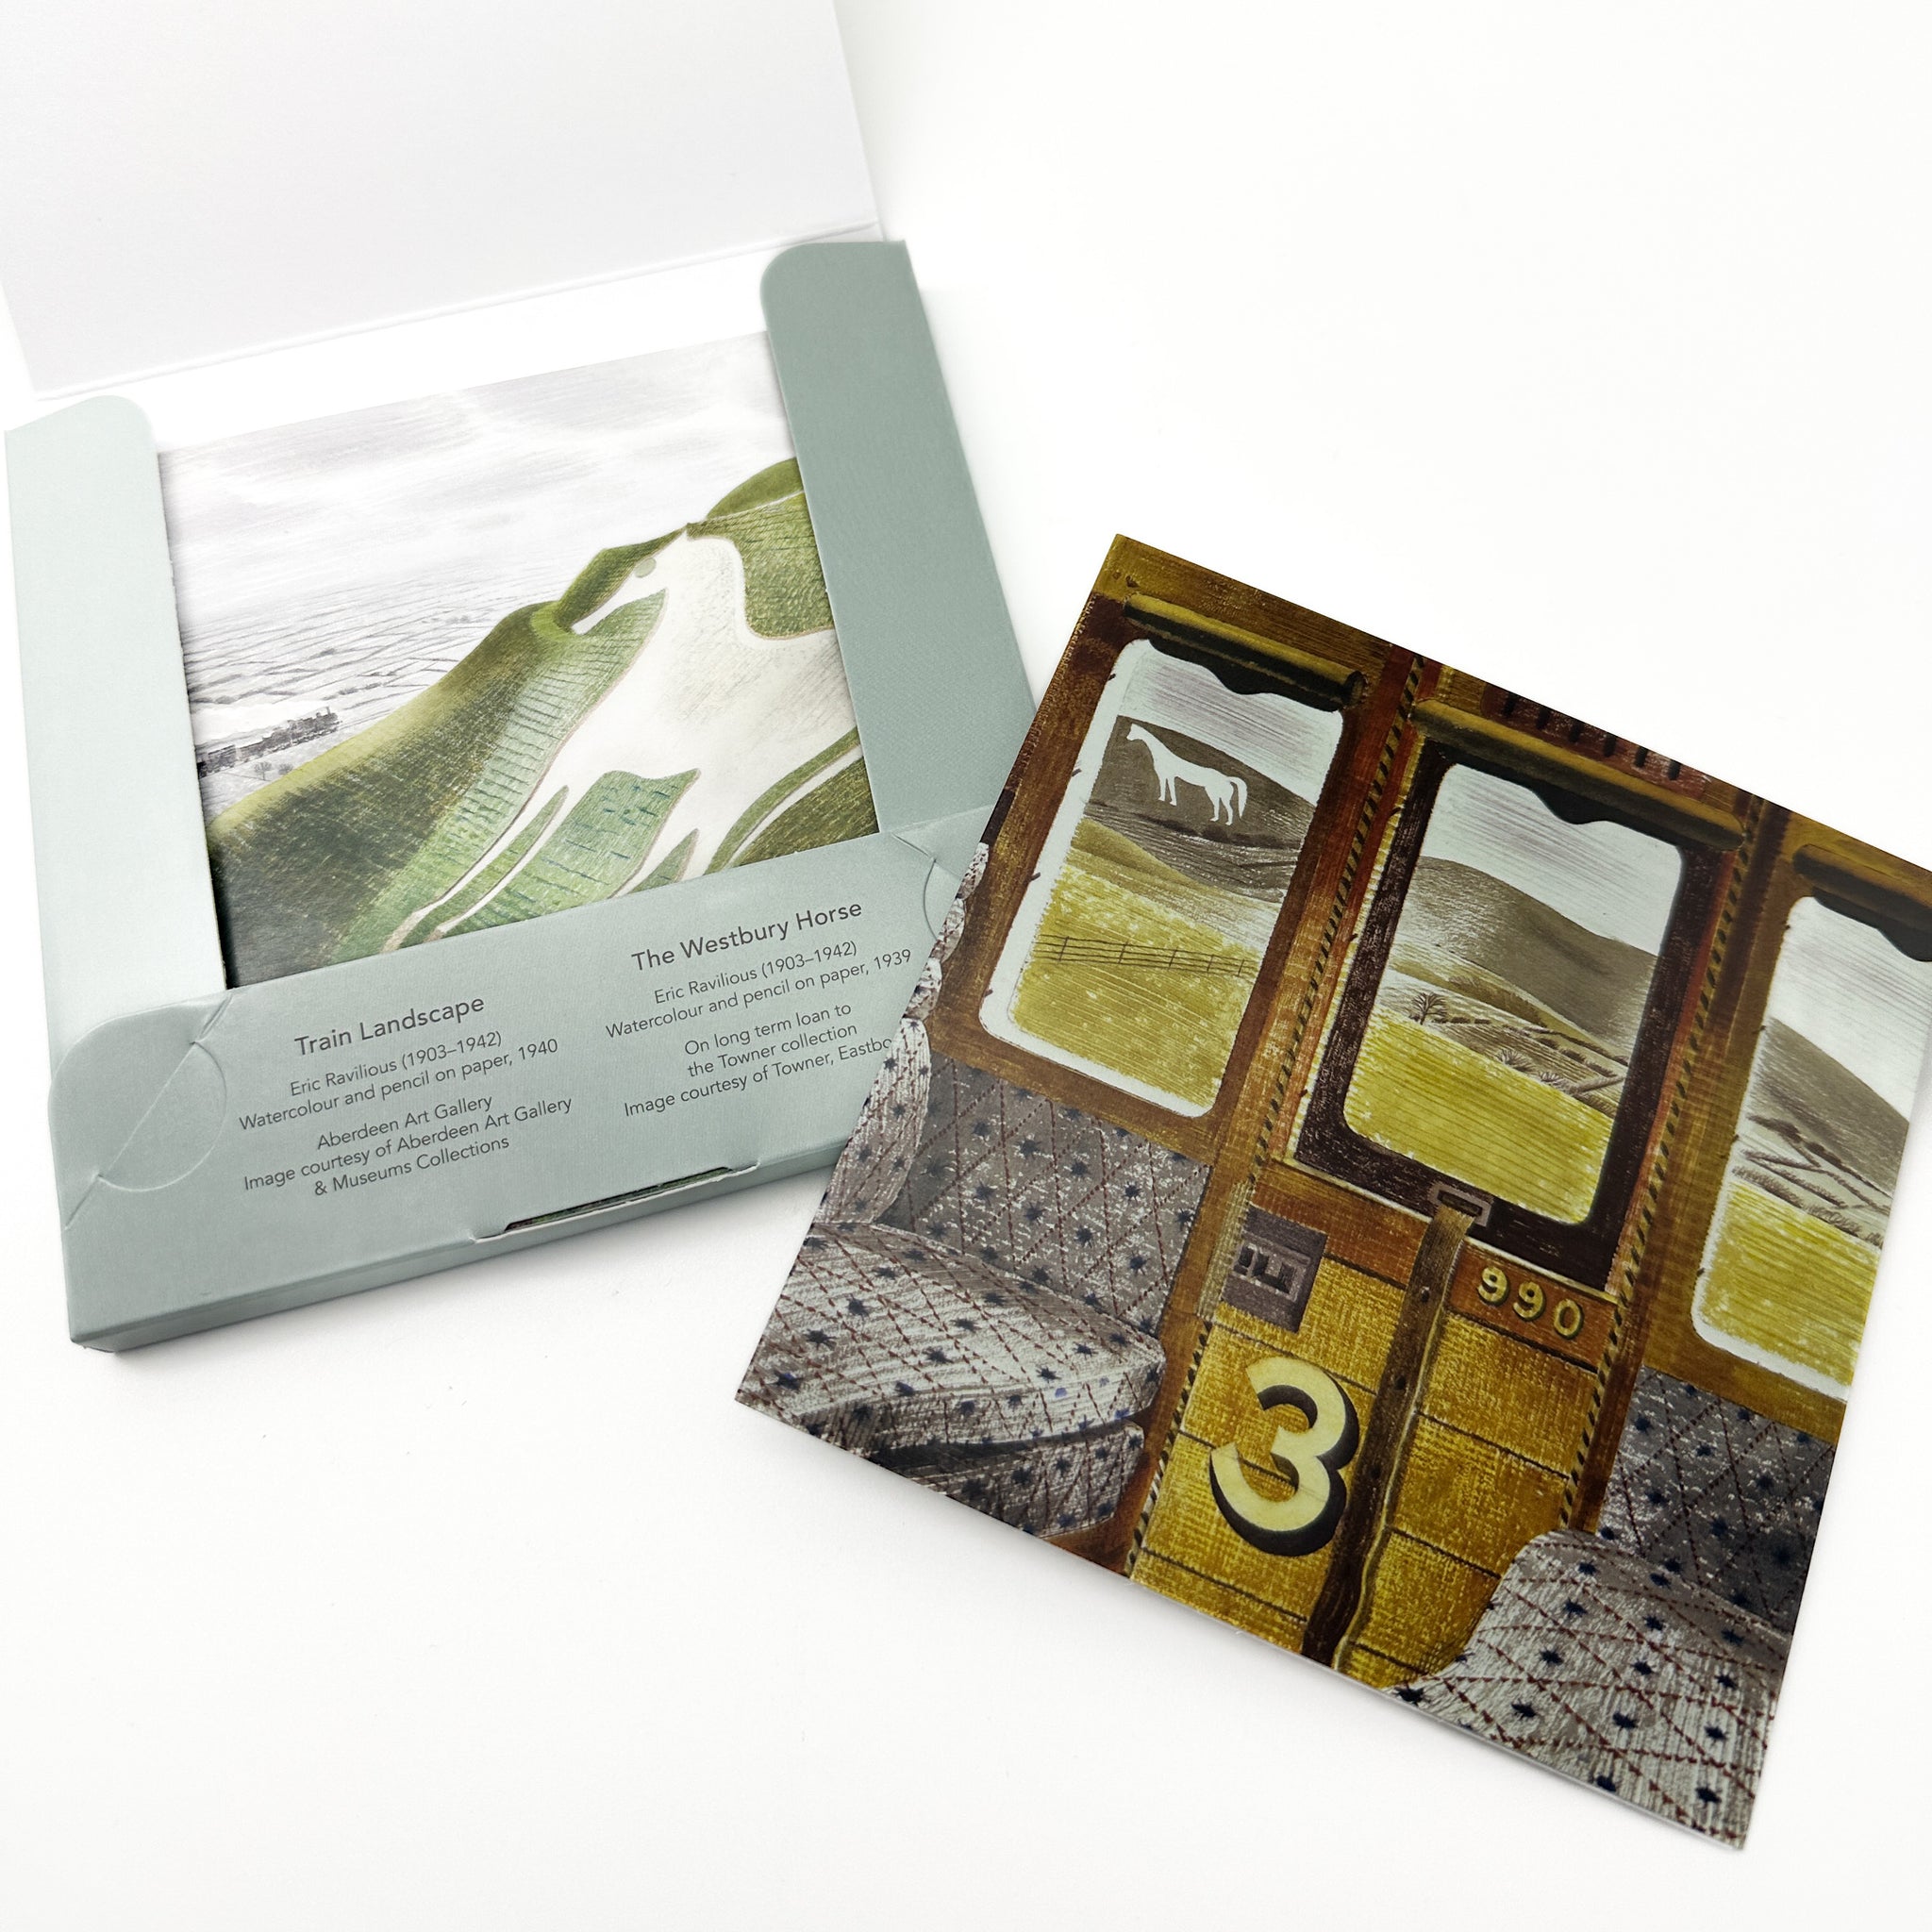 8 Notecards of Eric Ravilious Landscapes